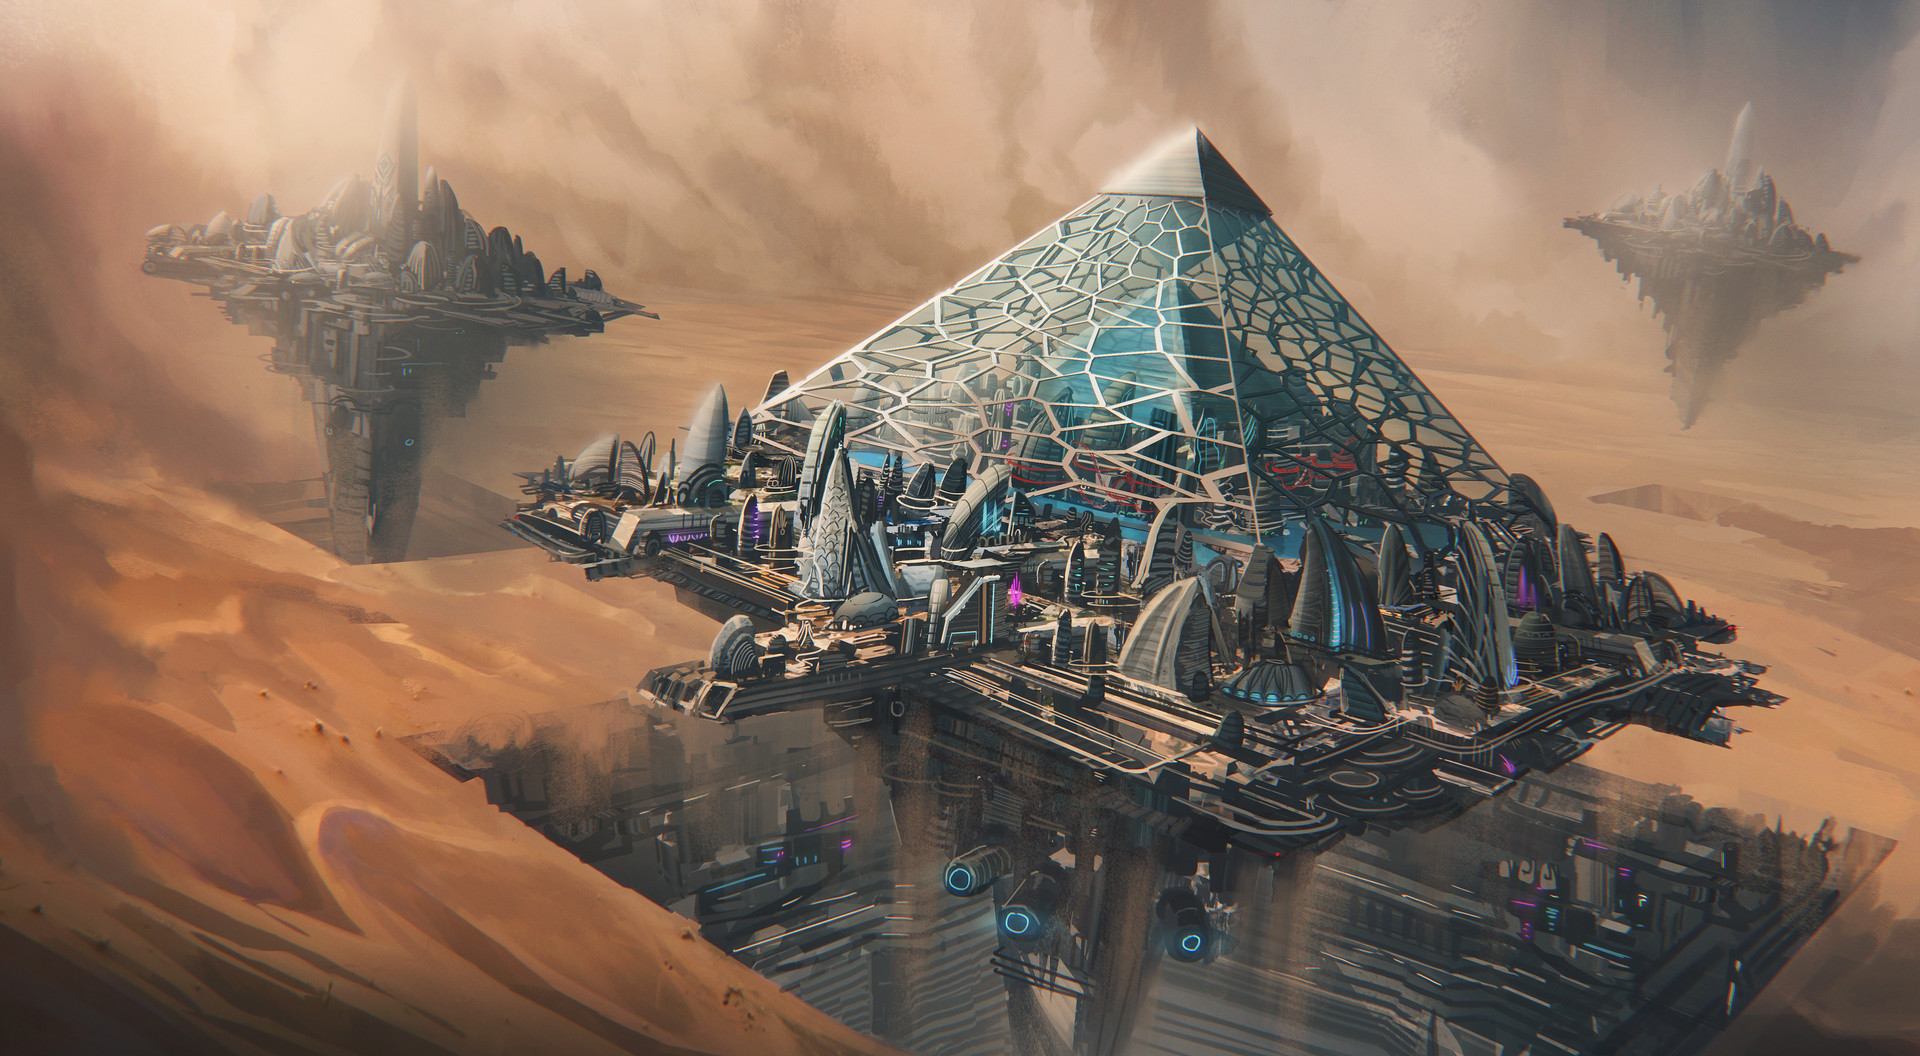 Oasis, A Gambling Paradise by Leon Tukker